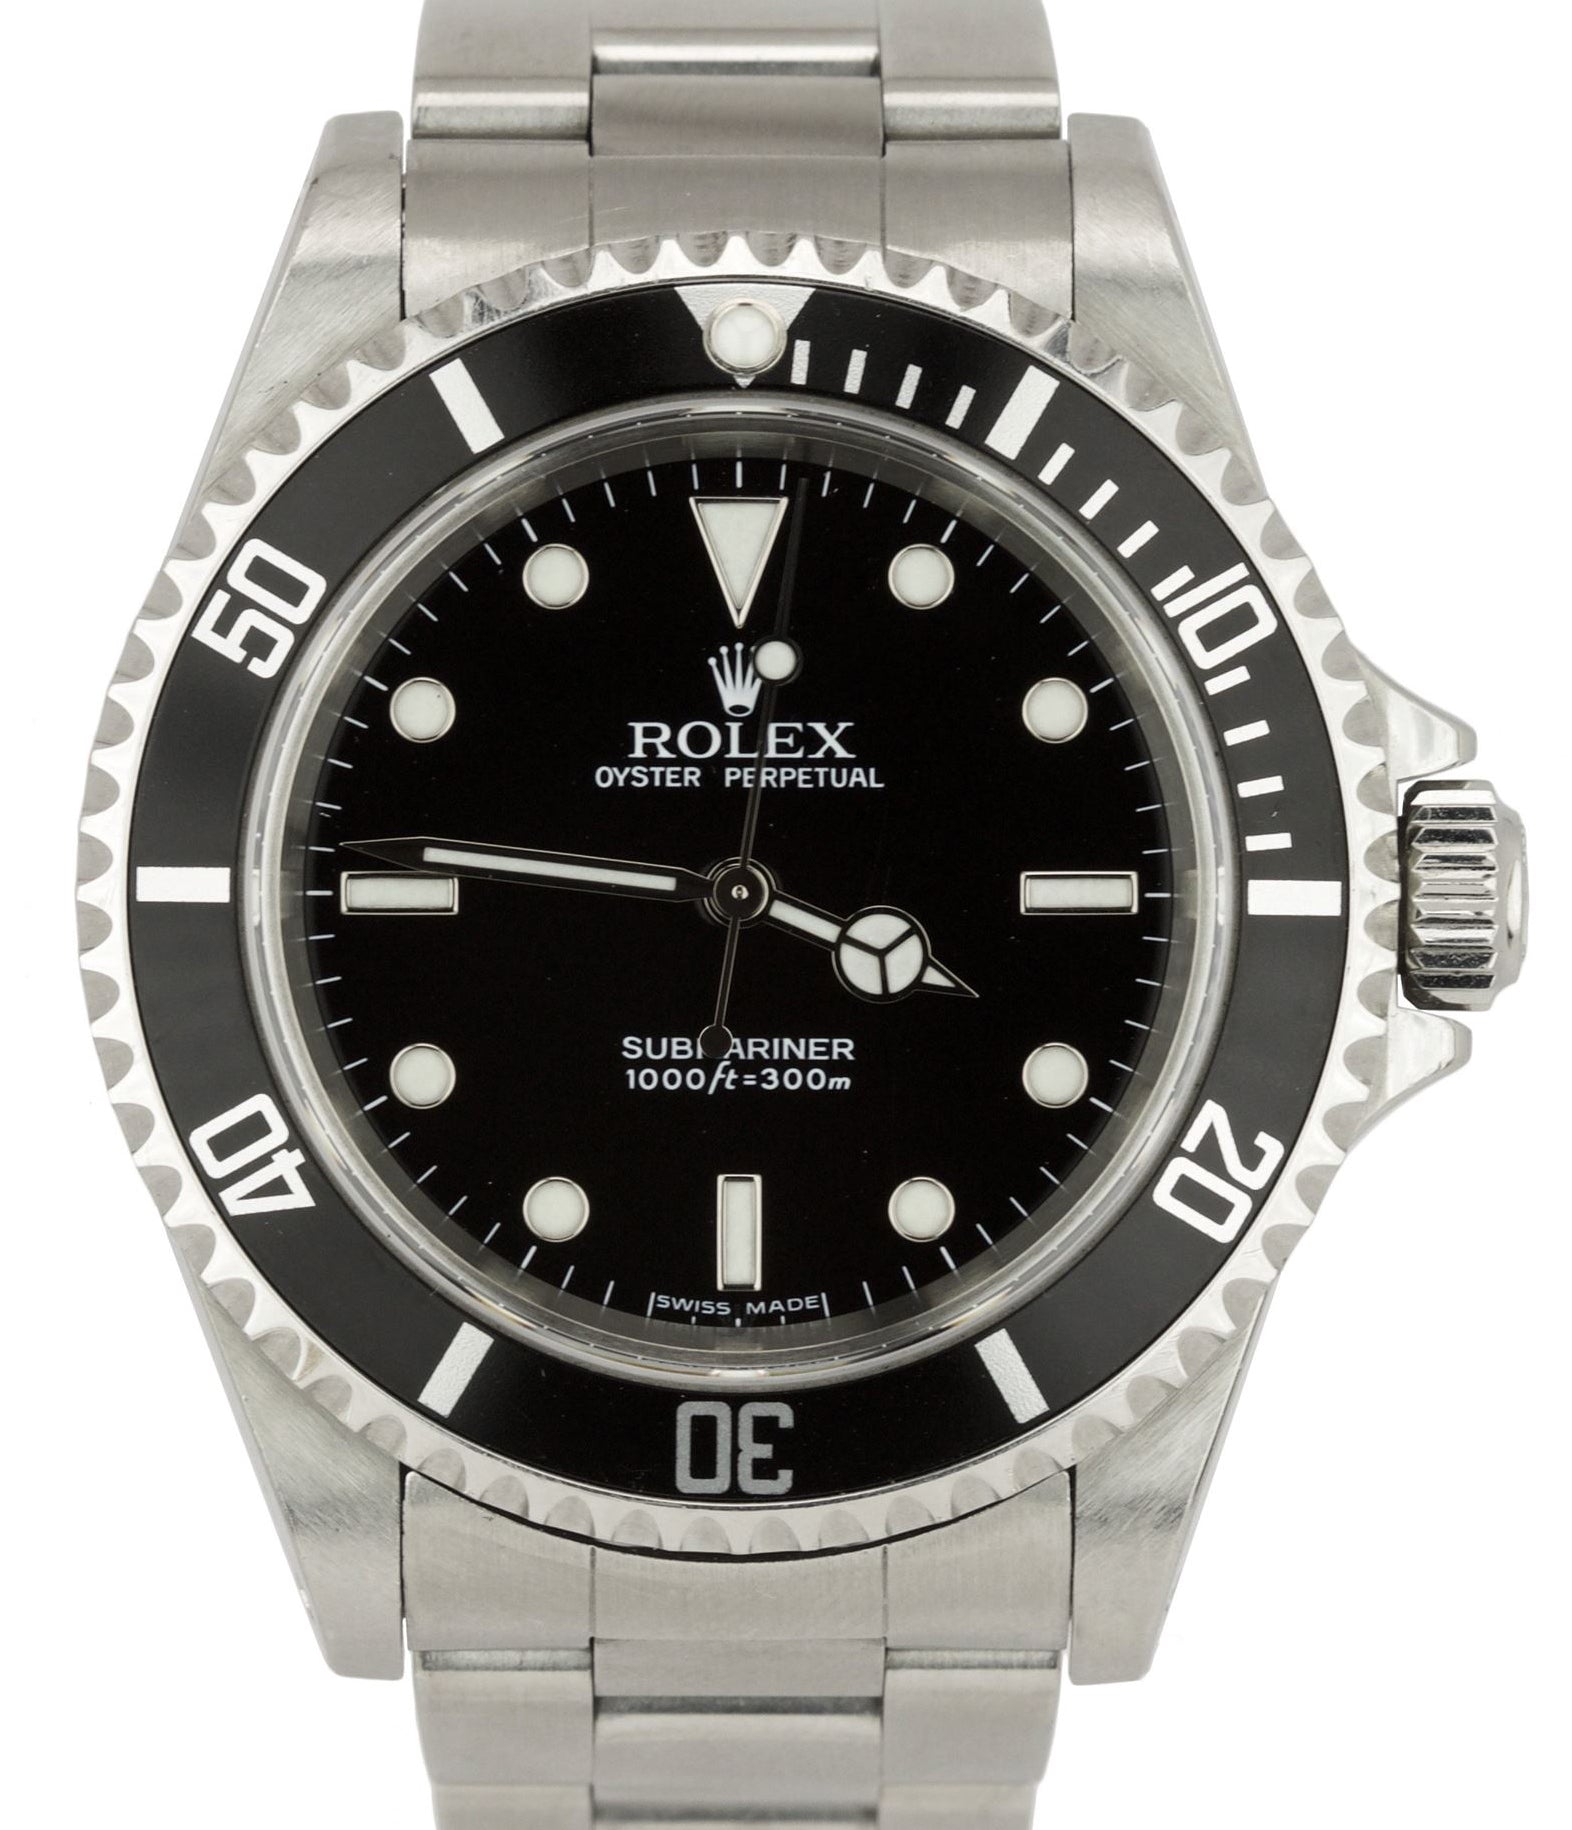 MINT 2001 Rolex Submariner No-Date 14060 M P Black Dive 40mm Stainless Watch